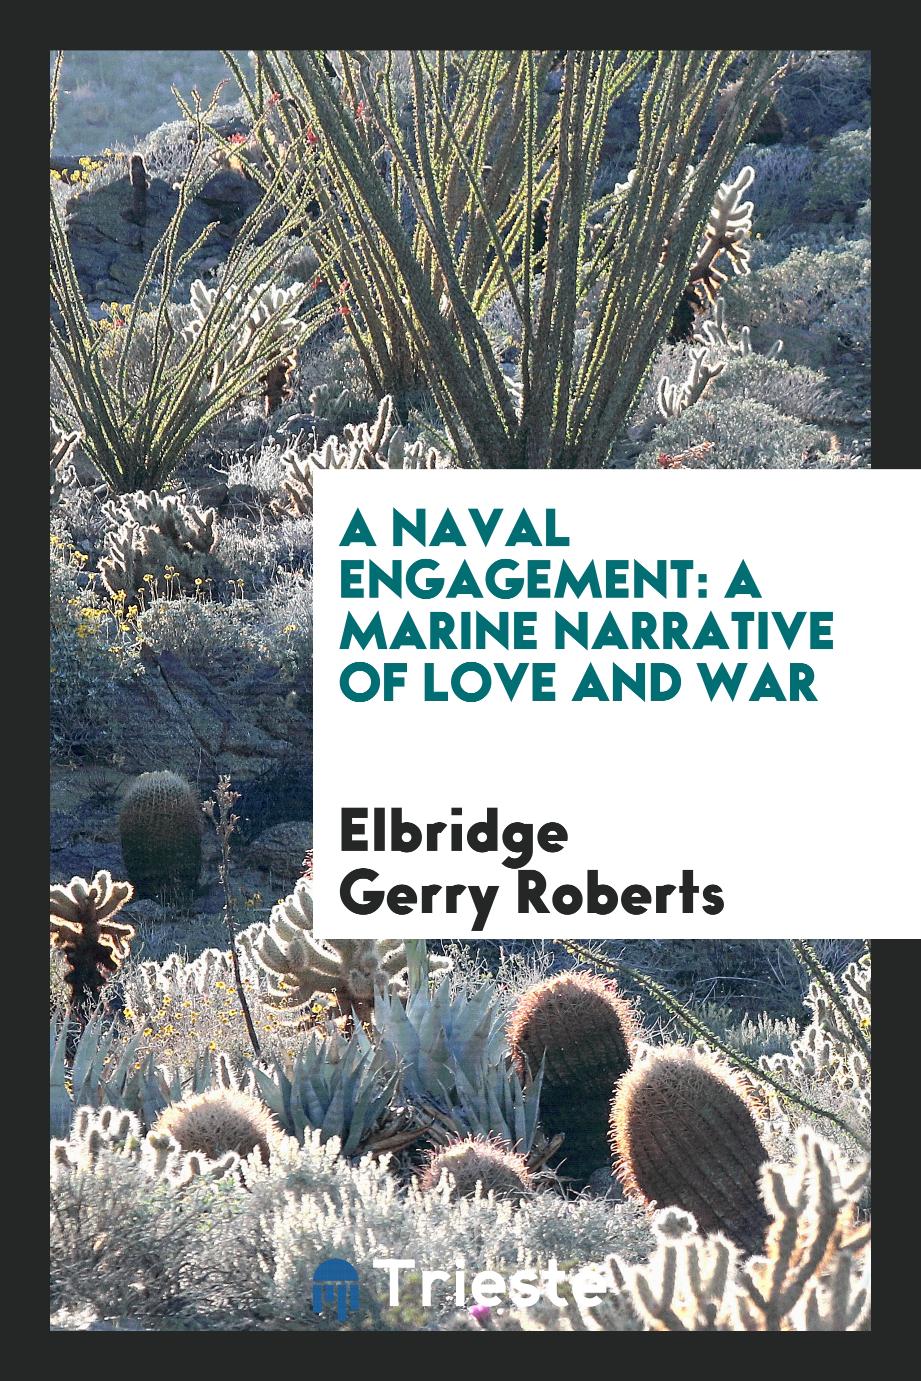 A Naval Engagement: A Marine Narrative of Love and War